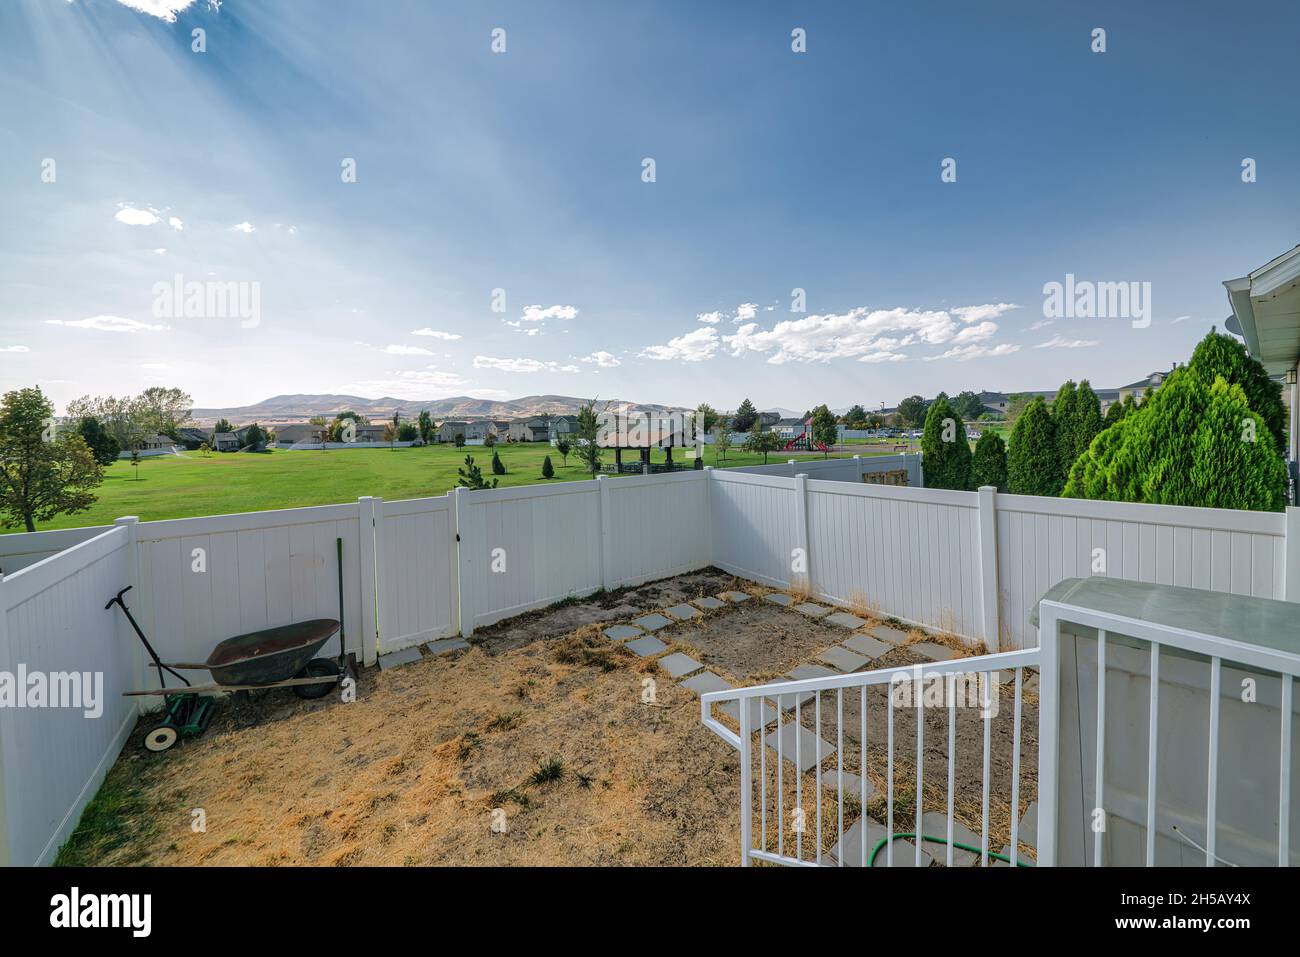 Backyard of a house with wheelbarrow, shovel and lawn mower against the white vinyl fence and gate. Stock Photo